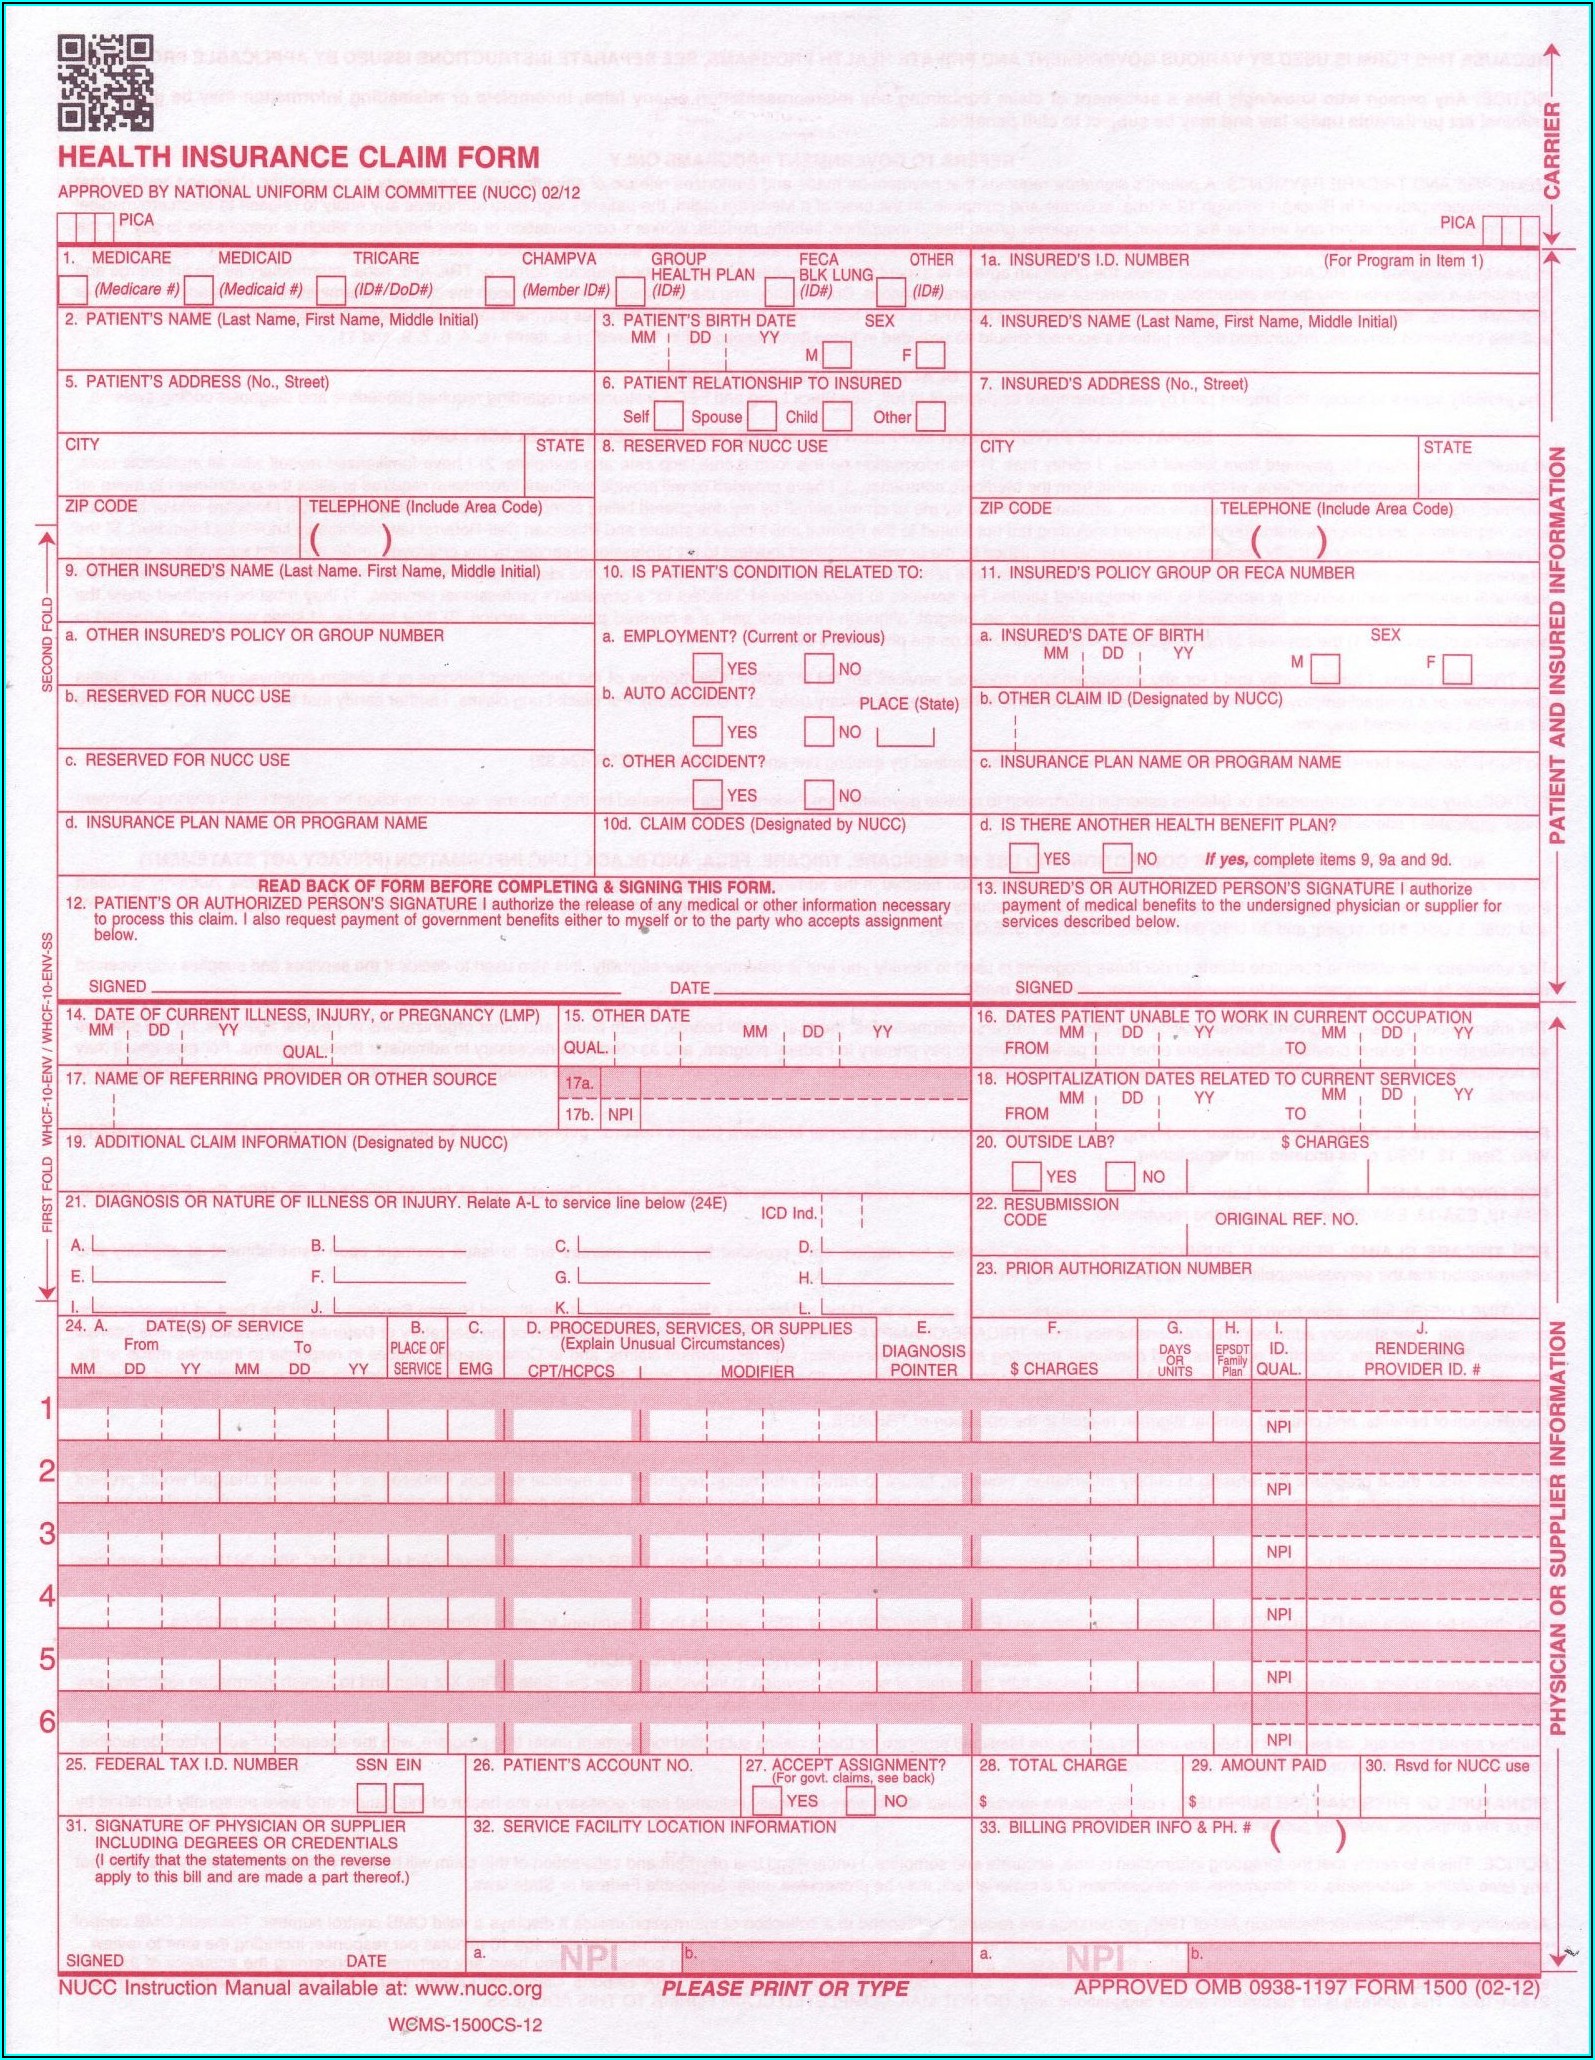 Health Insurance Claim Form 1500 Fillable Download